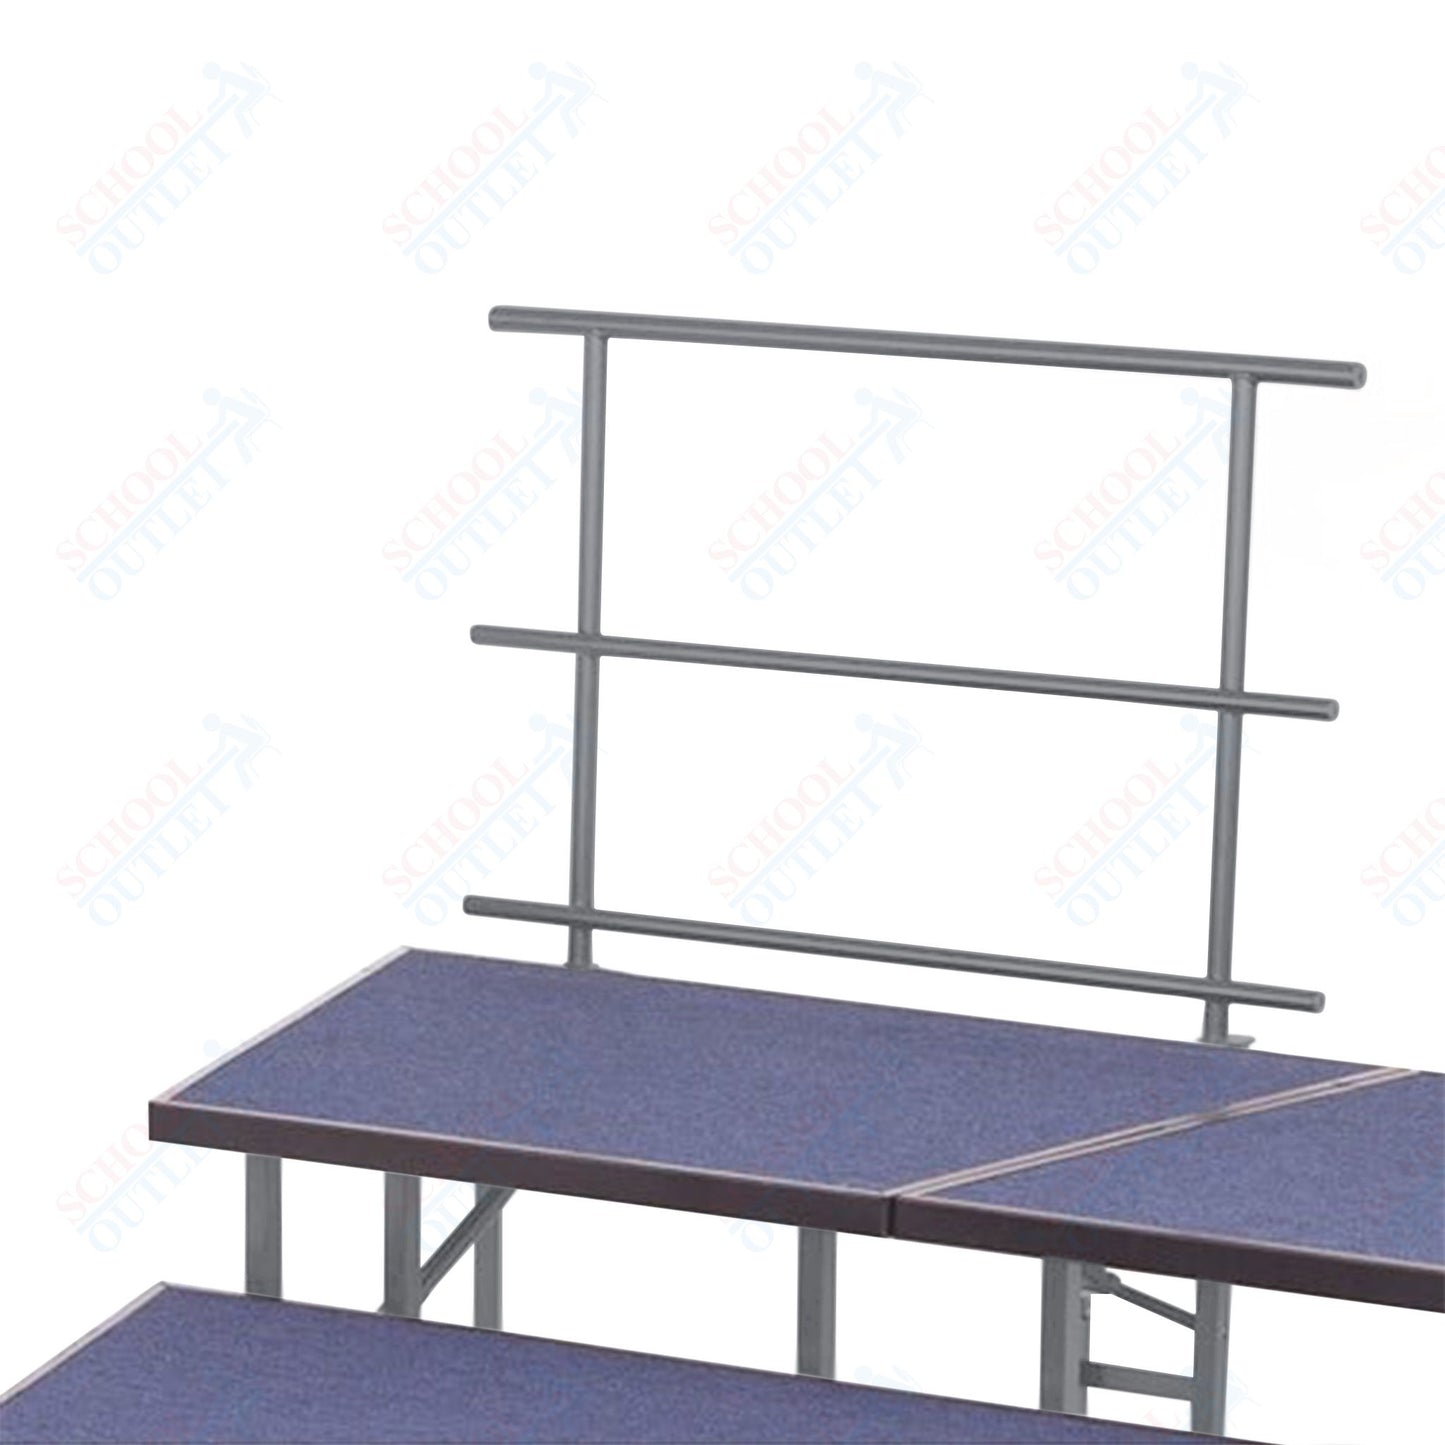 AmTab Stage and Riser Guard Rail - Chair Stop - 34" W x 31"H  (AmTab AMT-STGR36)